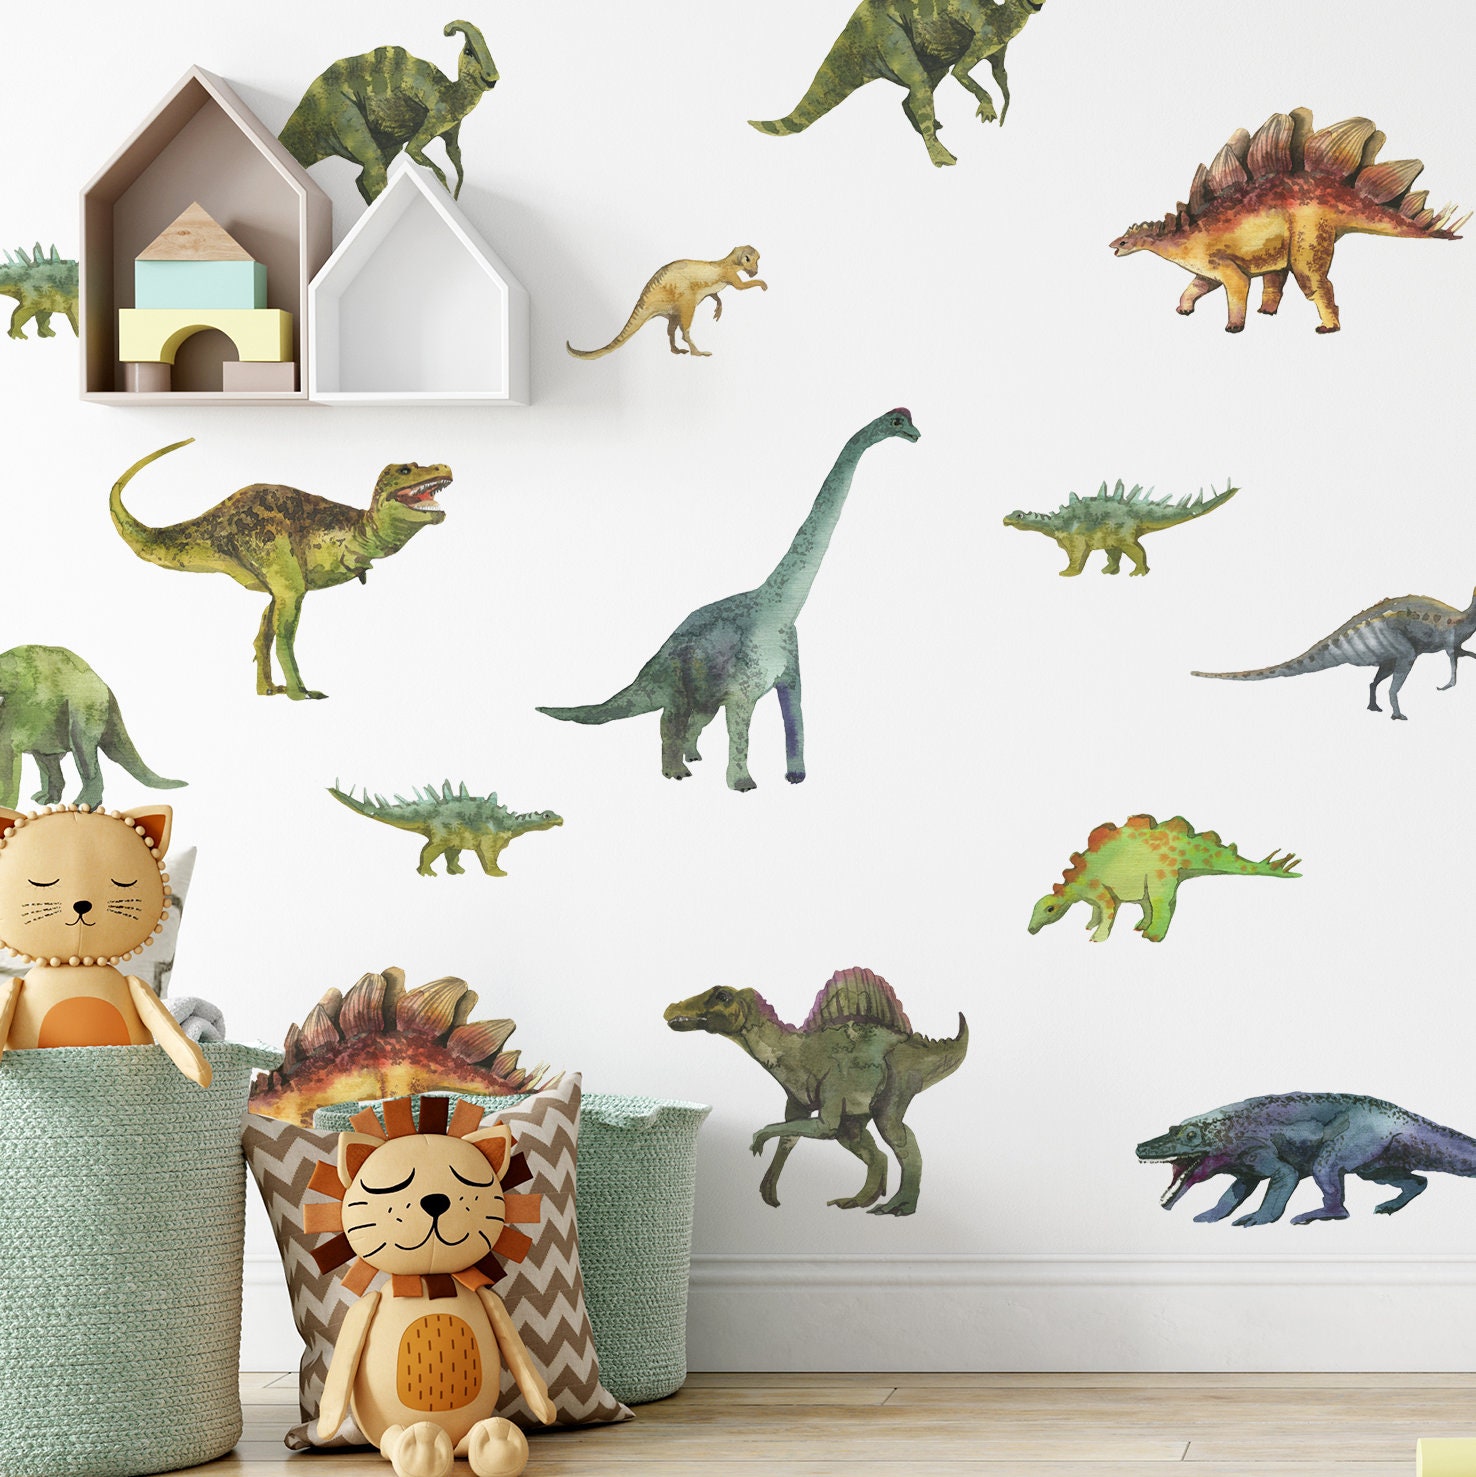 T-Rex Dinosaur Jumping out of wall. 3D Graphic Wall Decal Sticker. Pee –  StickerBrand